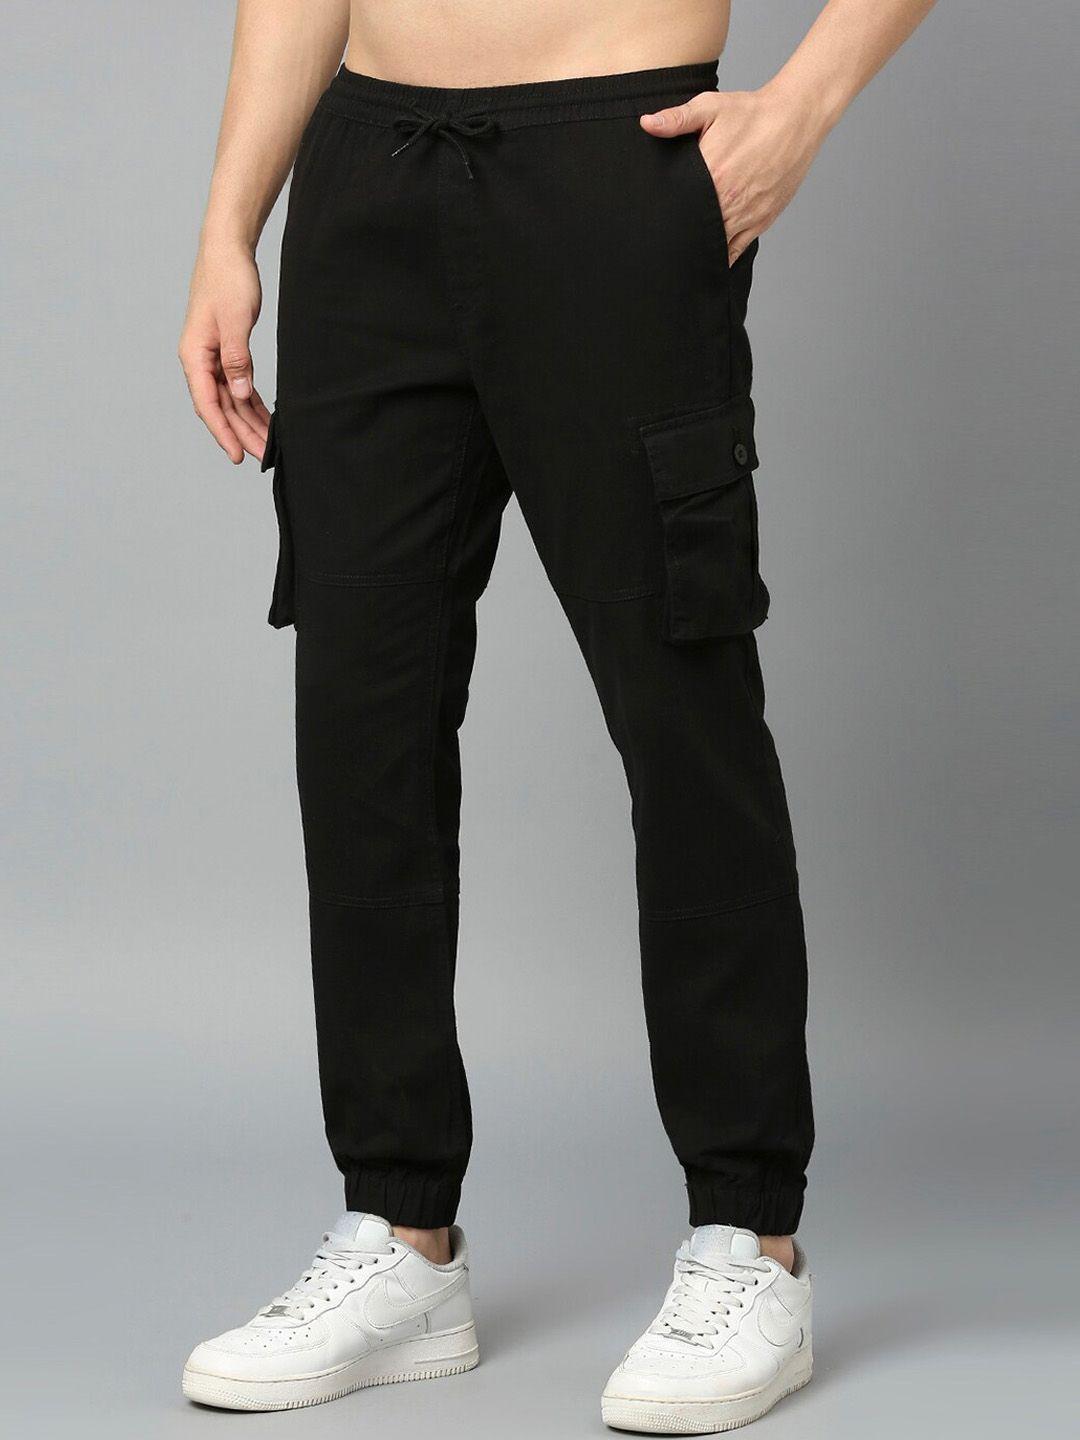 here&now men classic slim fit easy wash joggers